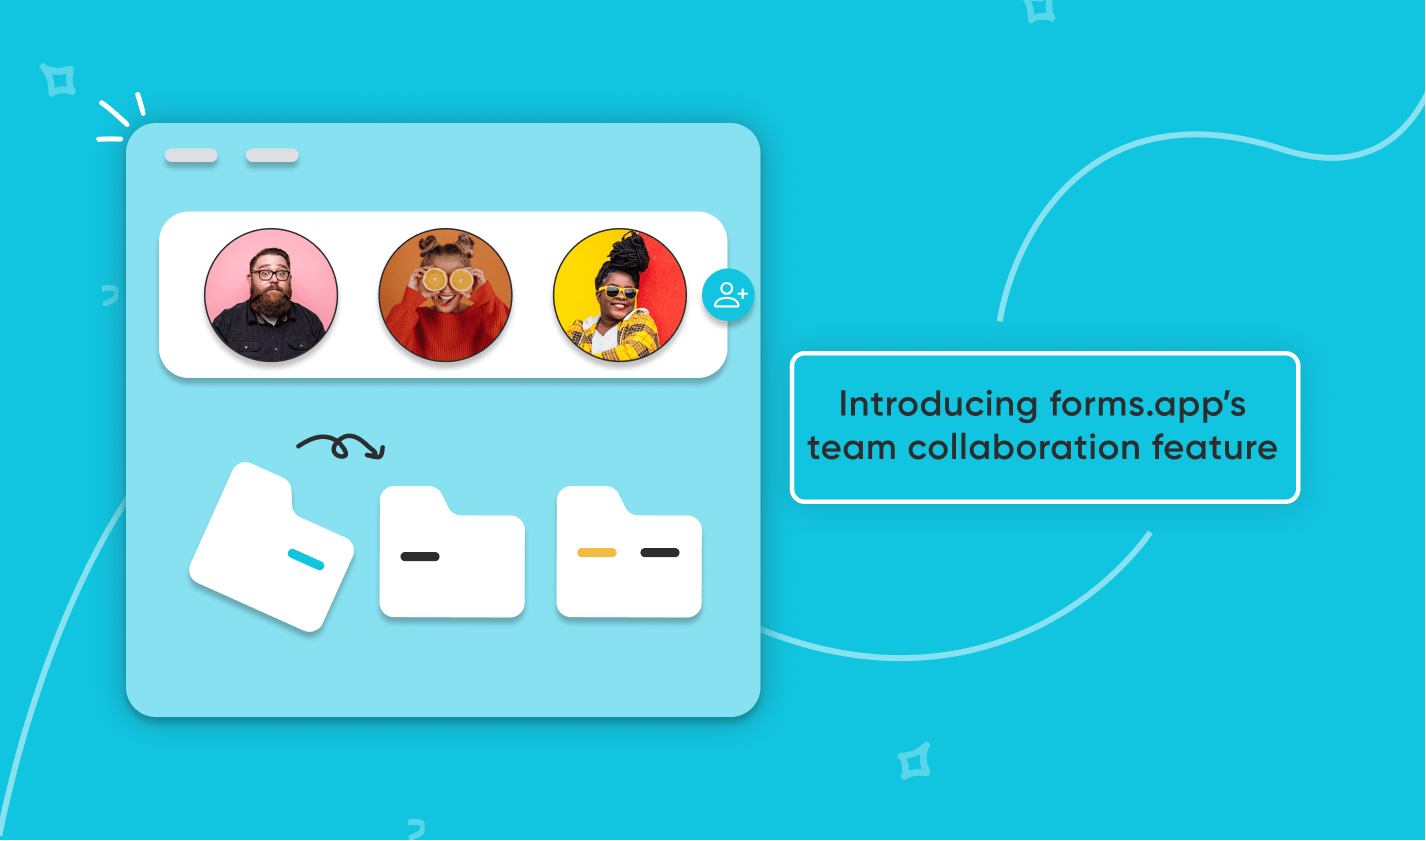 Introducing forms.app’s team collaboration feature